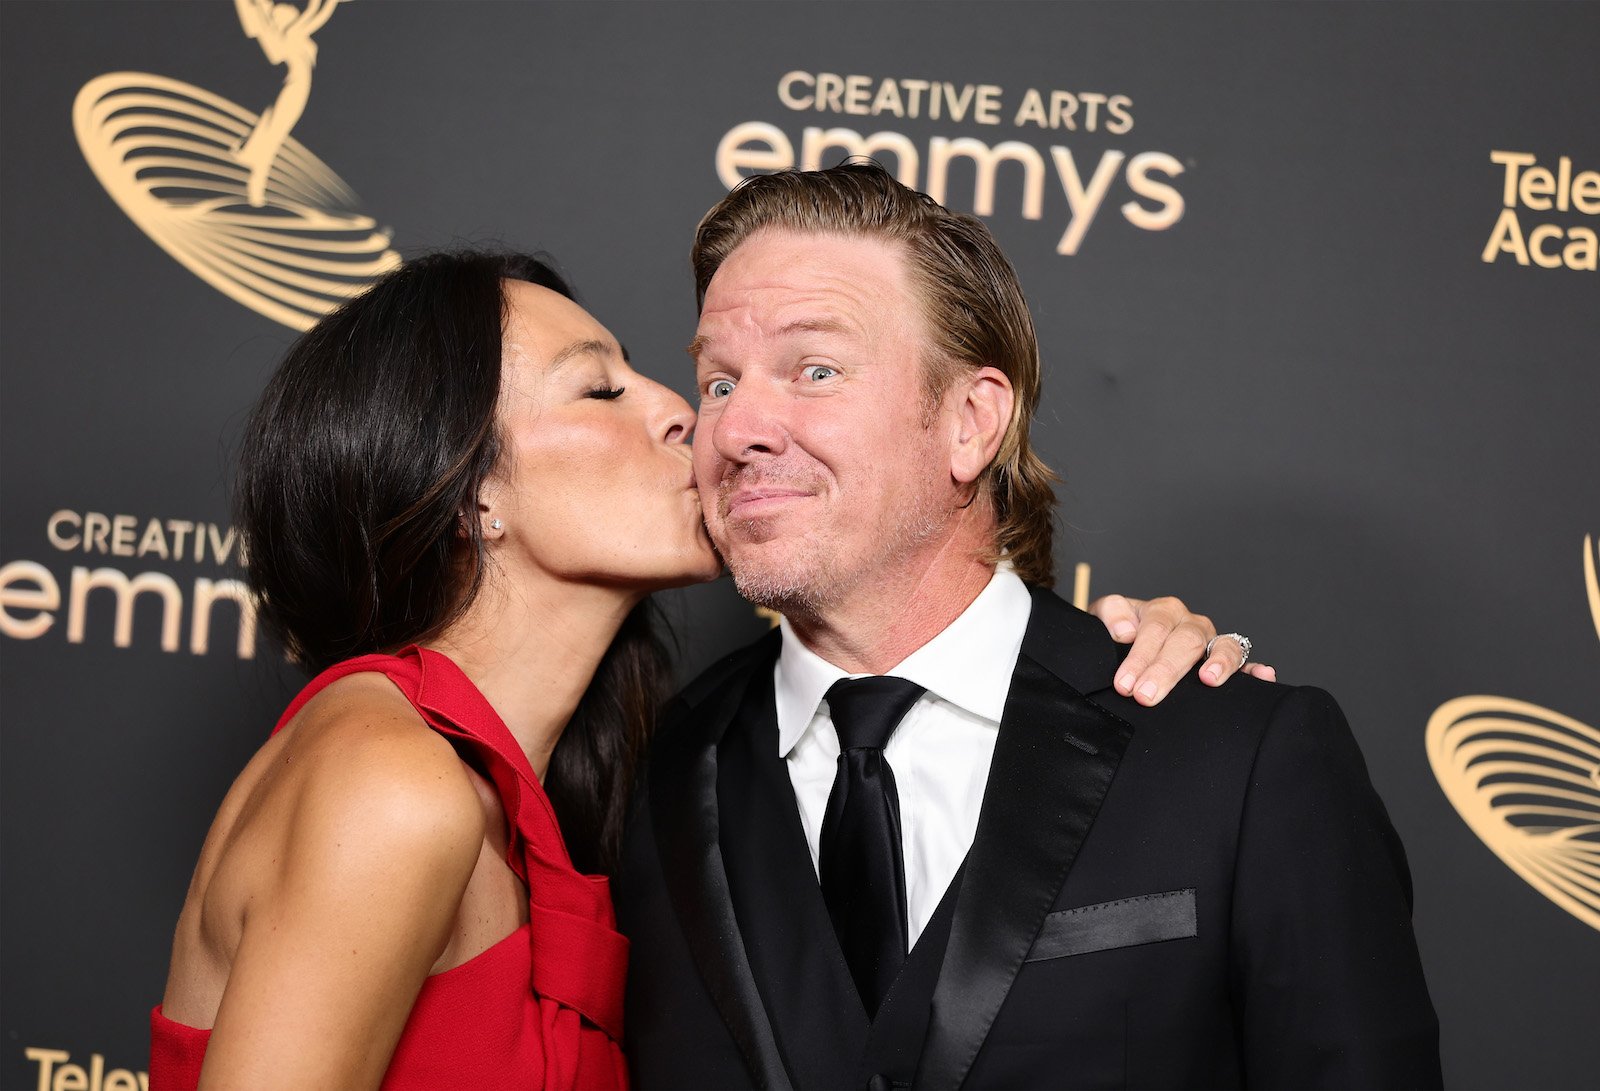 Joanna Gaines kissing Chip Gaines' cheek at an awards show